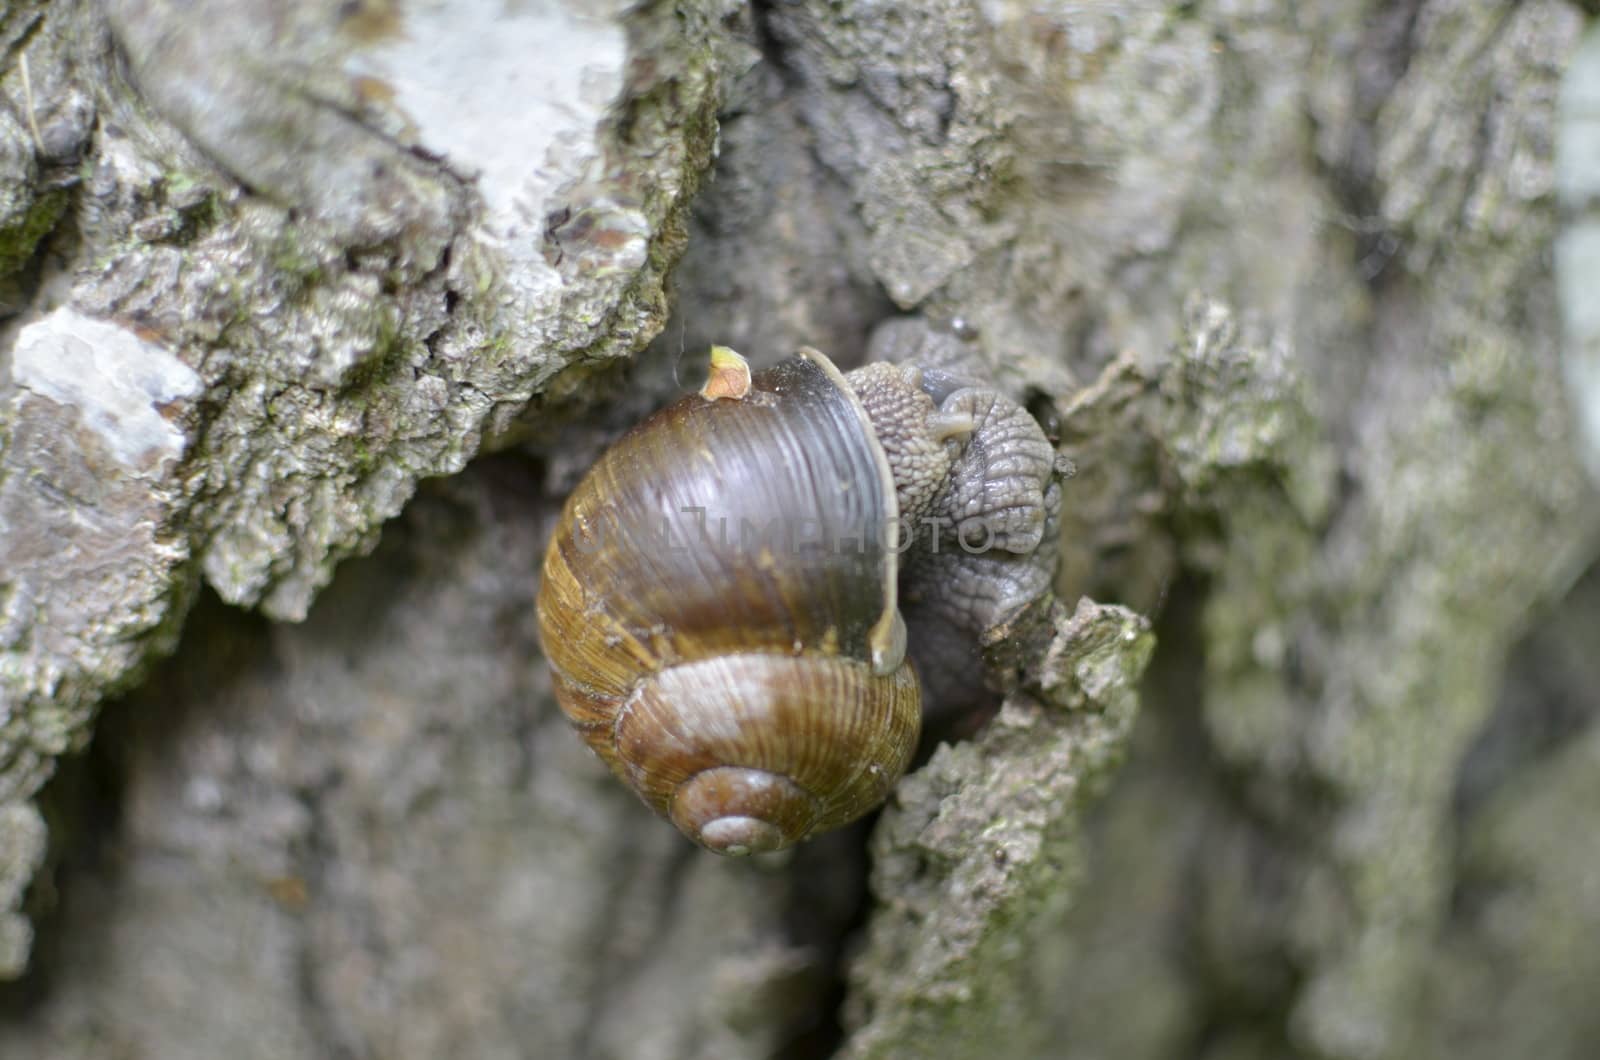 Brown Snail in Shell on Tree Bark by fstockluk